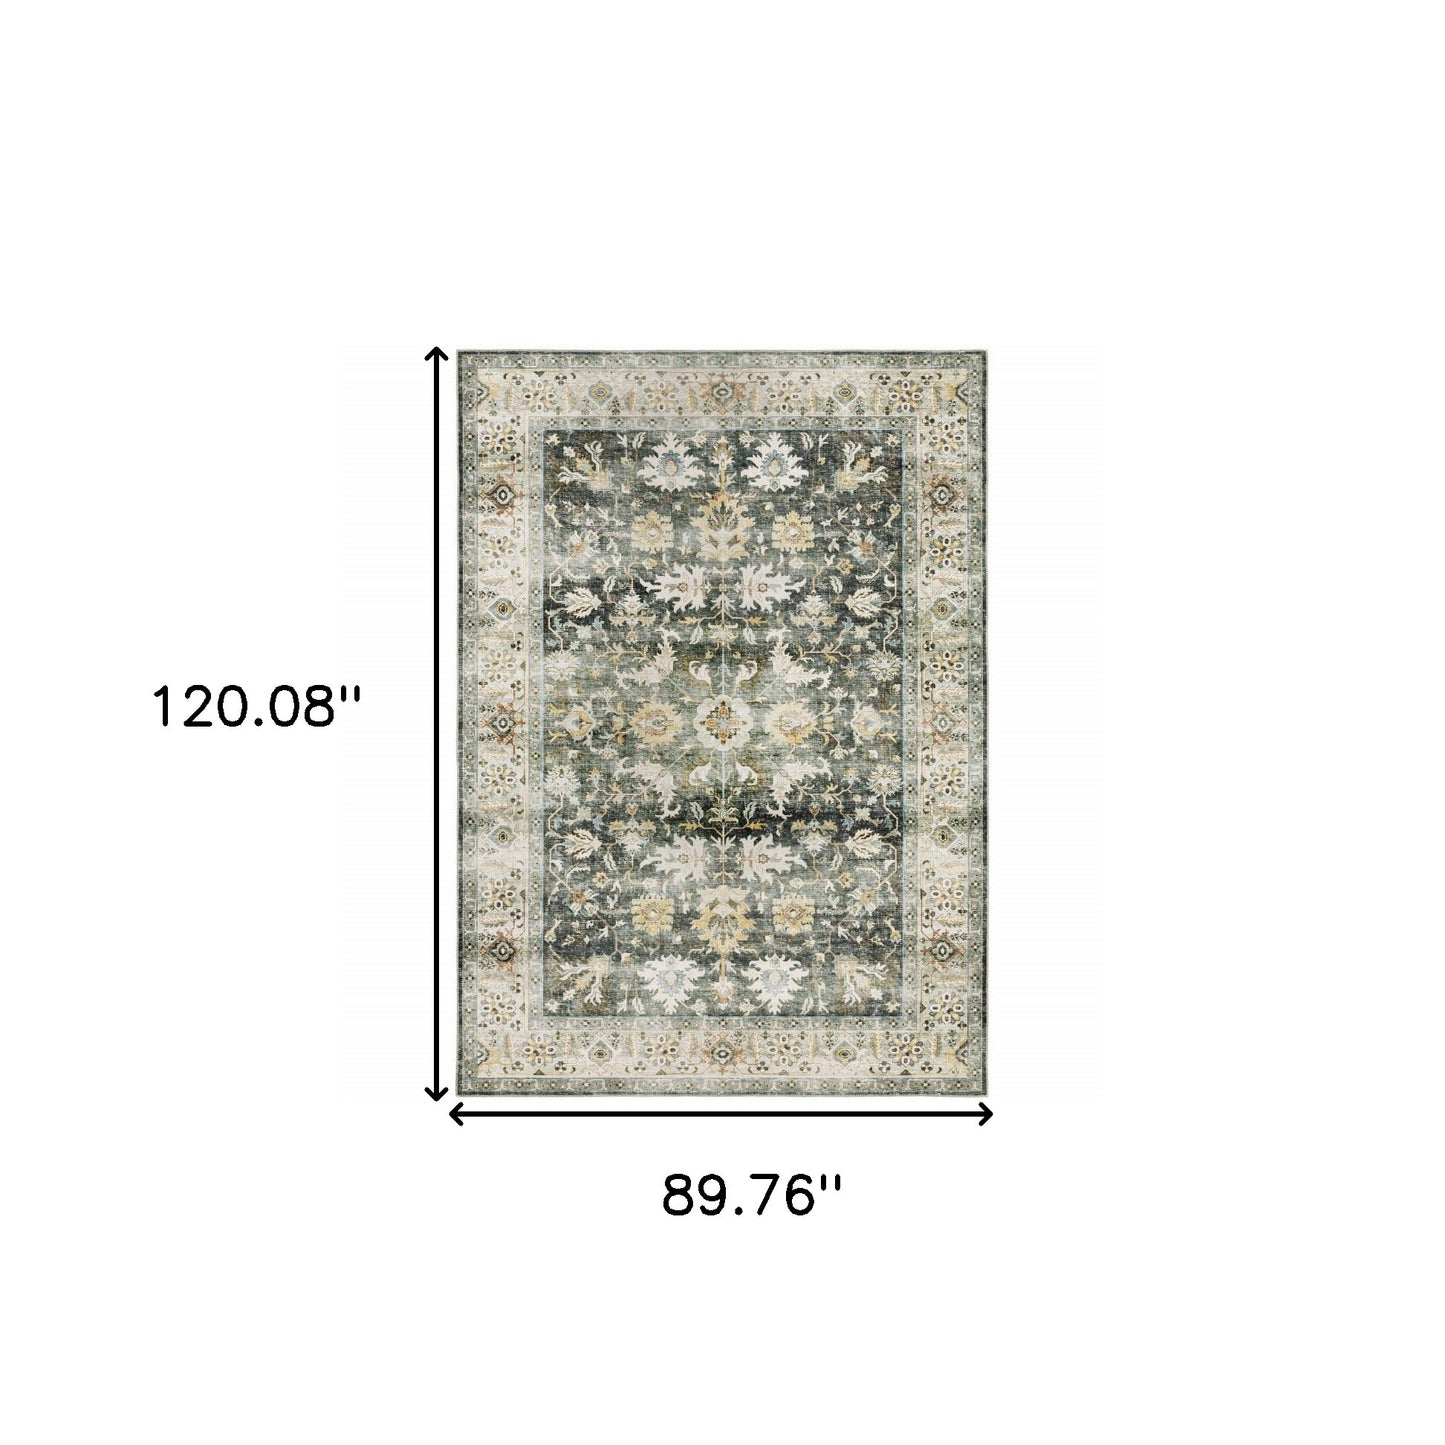 7' X 10' Grey Charcoal Gold Brown Ivory Pale Sage And Light Blue Oriental Printed Stain Resistant Non Skid Area Rug